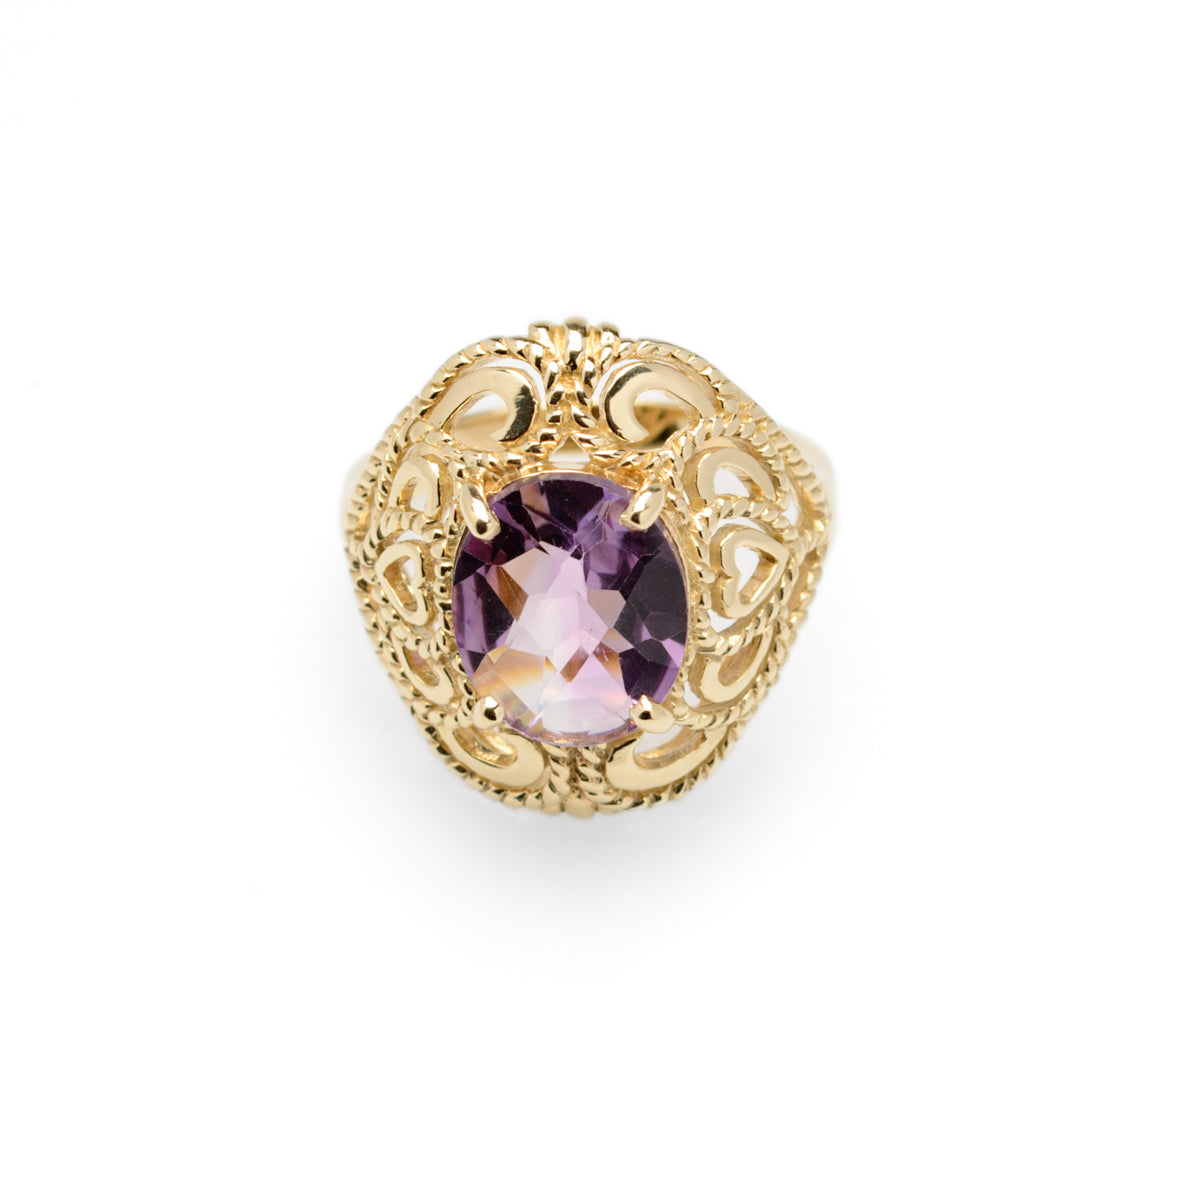 9ct Gold & 3.75 Carat Amethyst Large Cocktail Ring Filigree Heart Mount (Code A957)